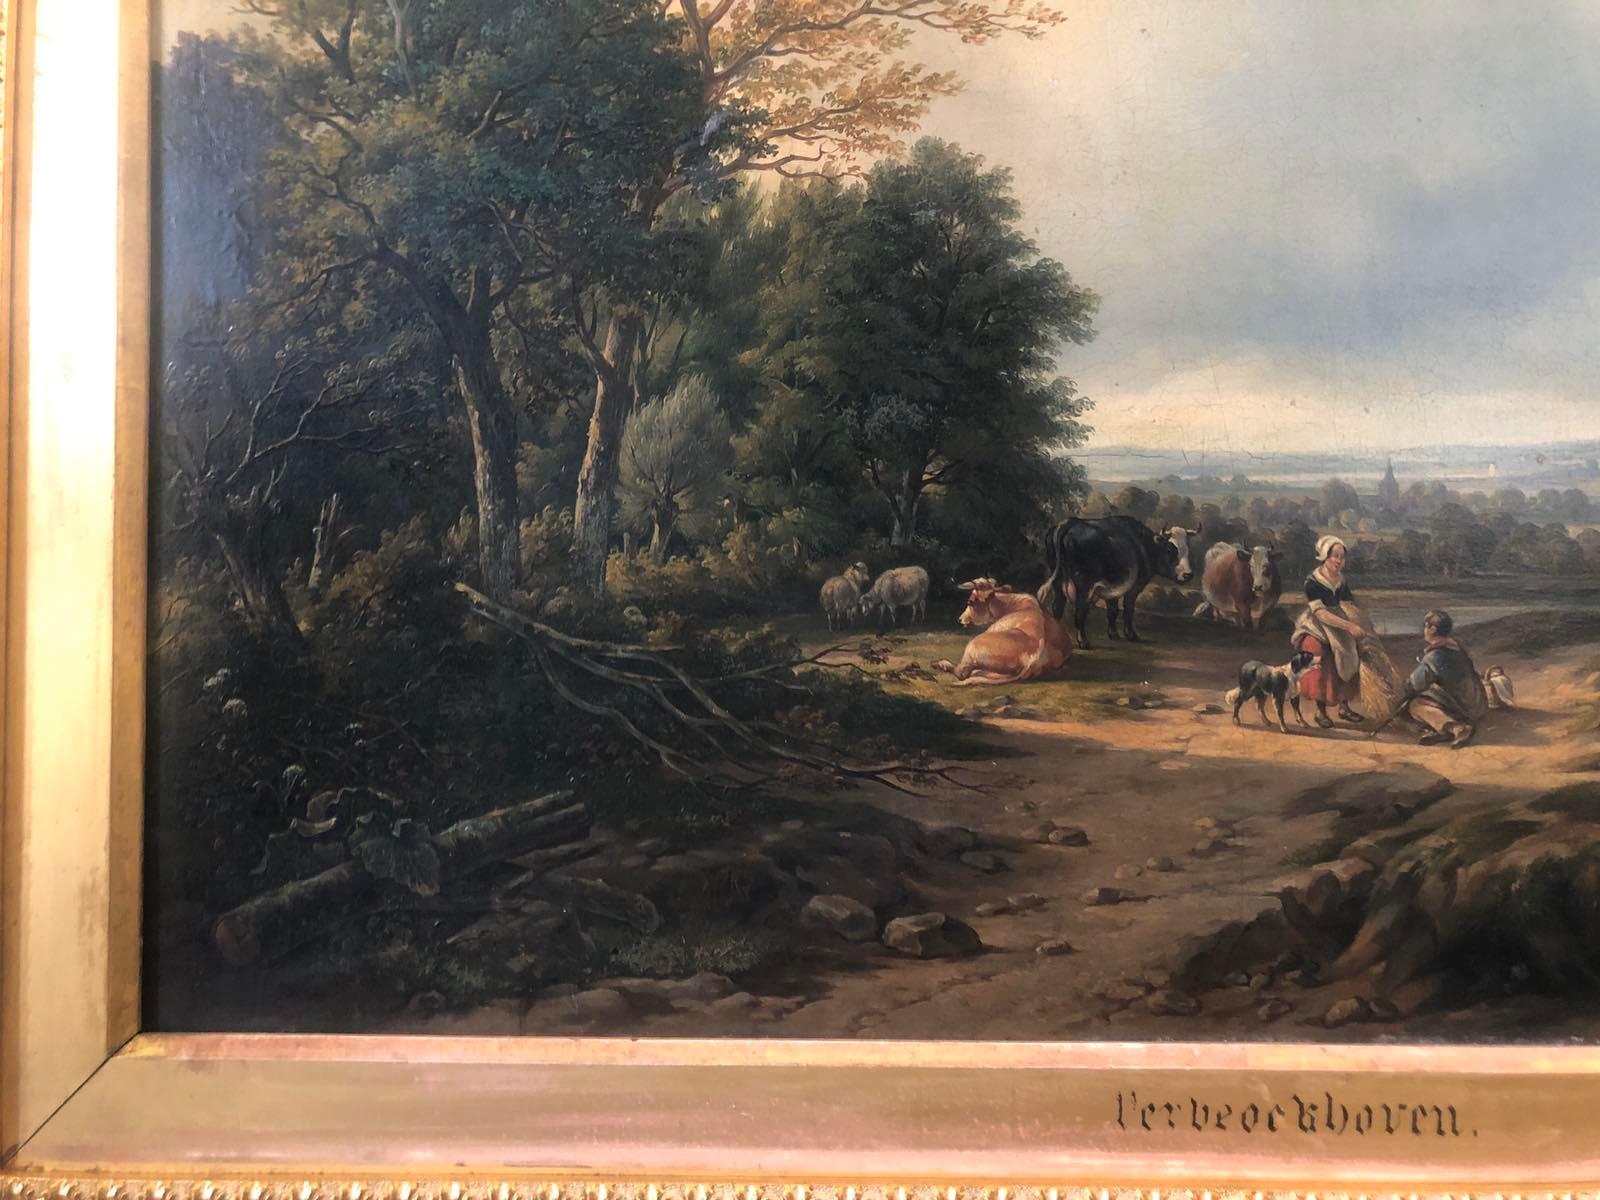 Hand-Painted Verboeckhoven, Masterpiece Oil on Canvas ‘Landscape’, circa 1820